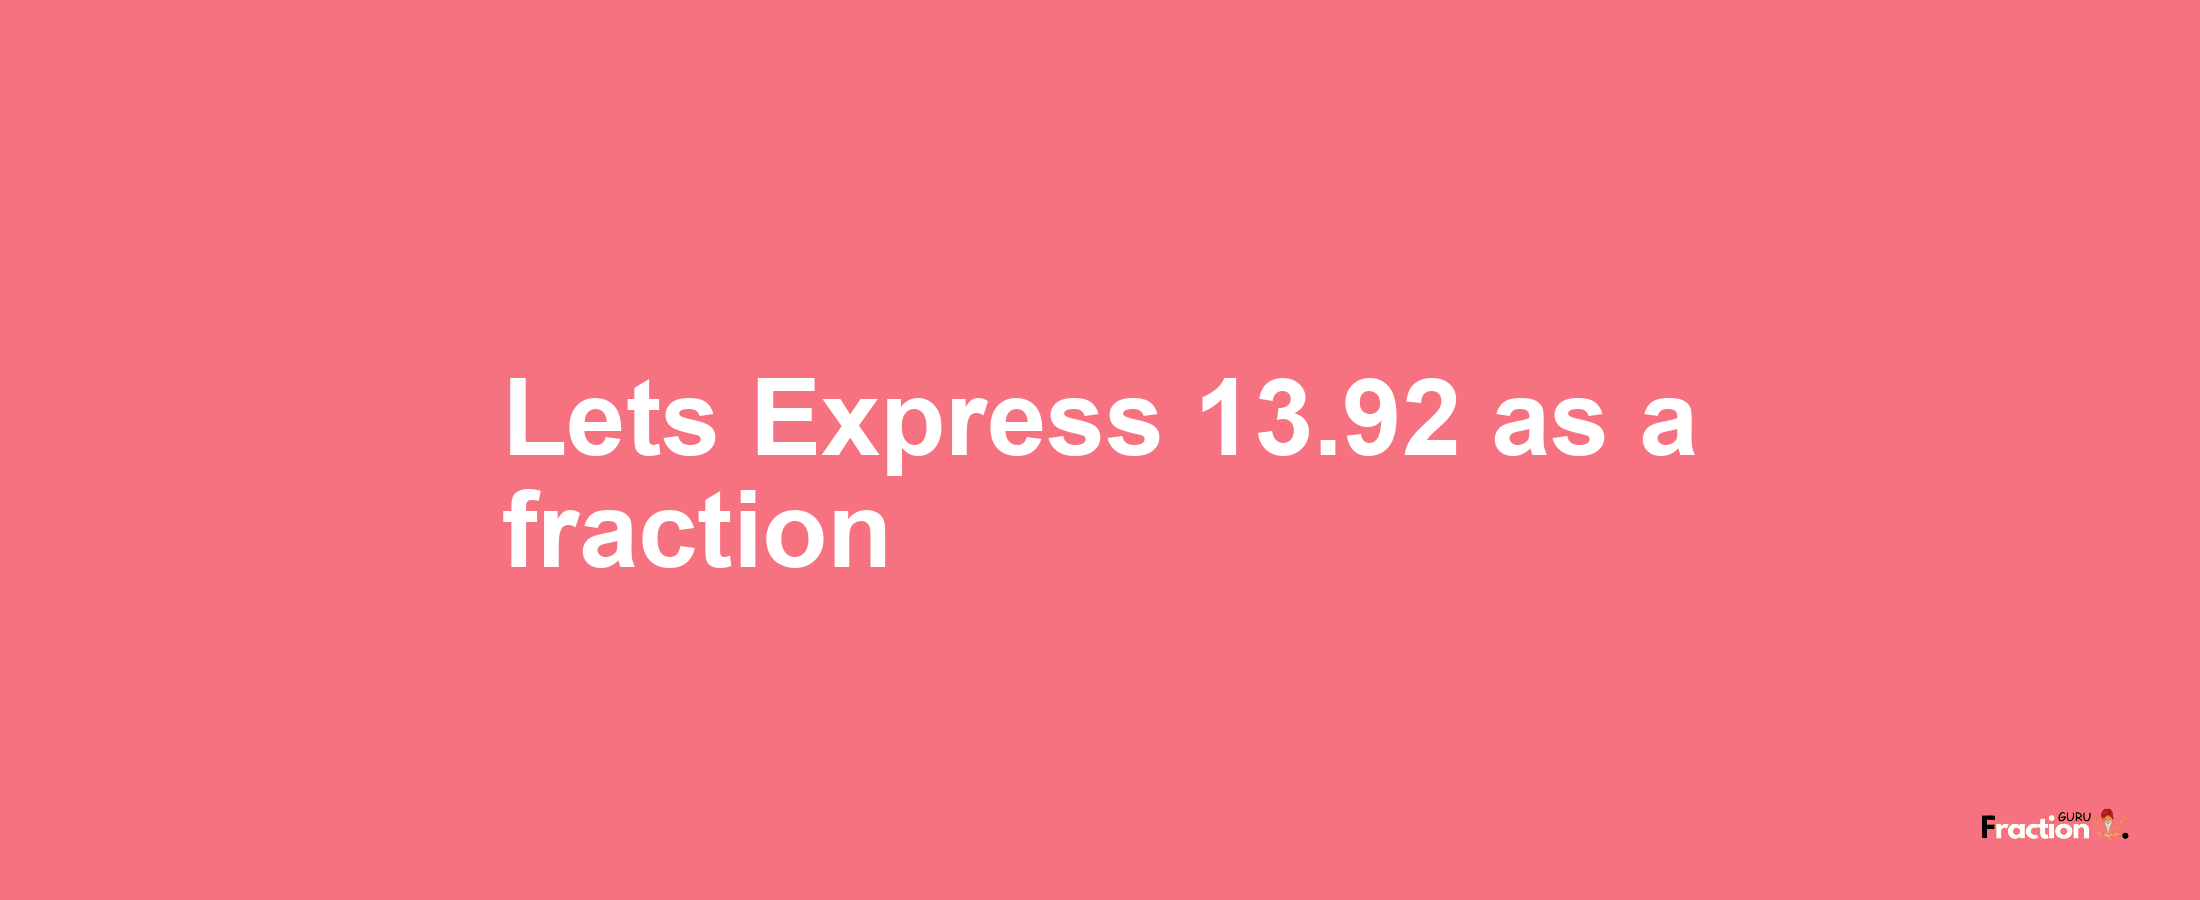 Lets Express 13.92 as afraction